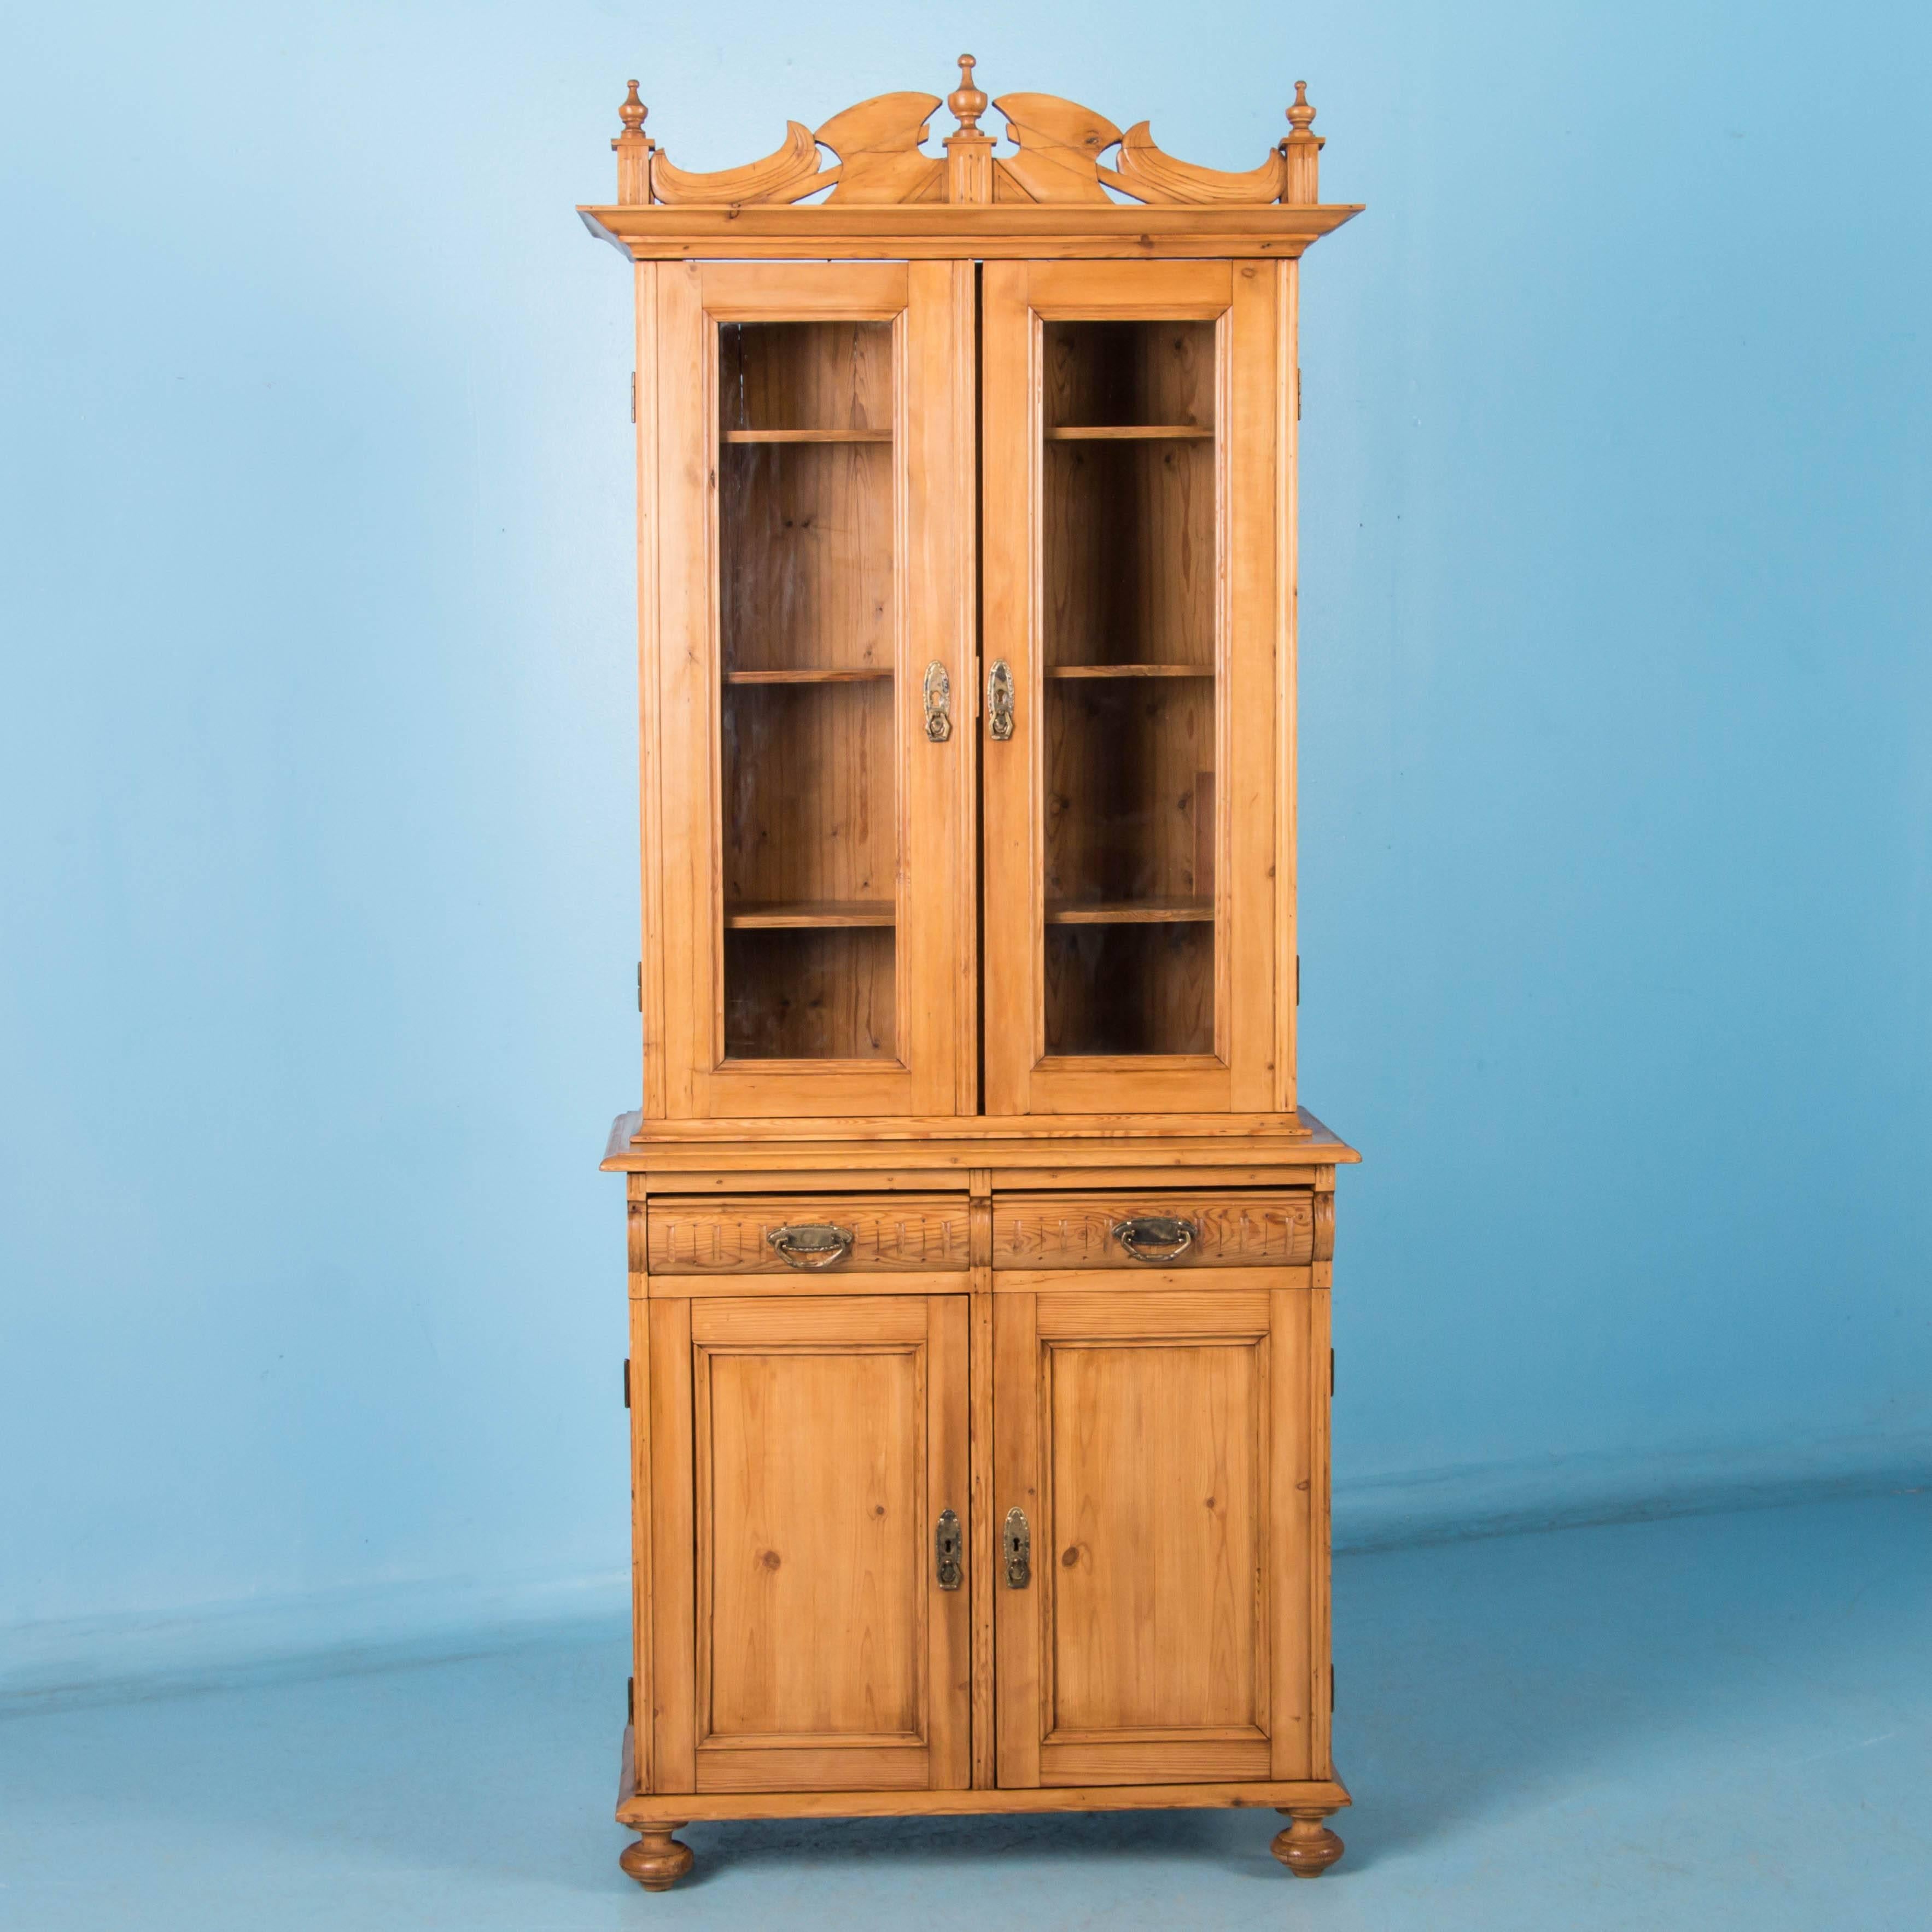 This tall, narrow cabinet is made in two sections with adjustable shelving behind the two glazed doors above, and two drawers with cupboard space below. The natural pine bookcase has been sealed with a satin wax finish.